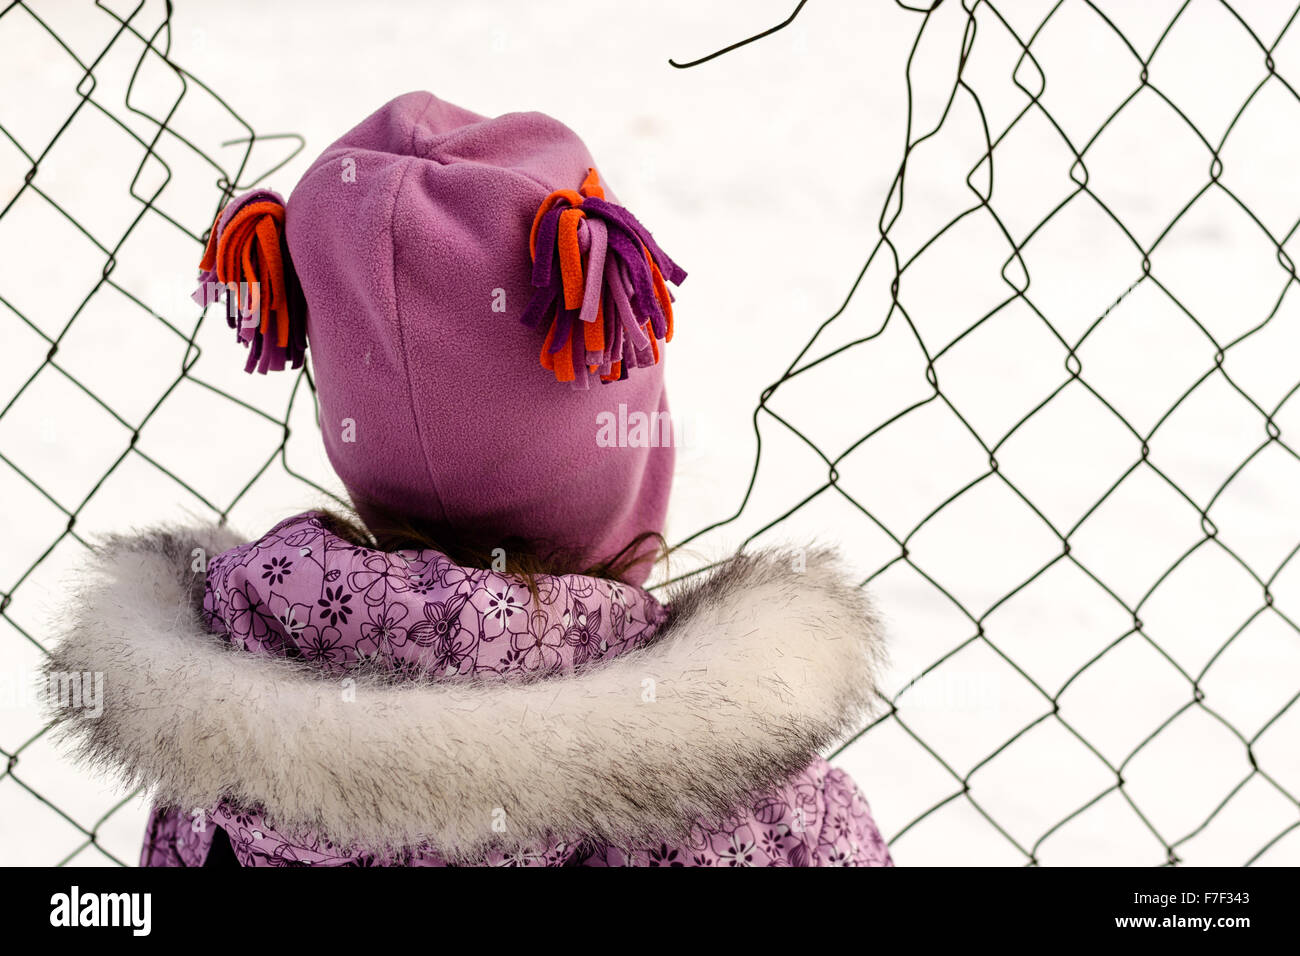 Young girl in warm winter clothes looks through a broken chain link fence Stock Photo